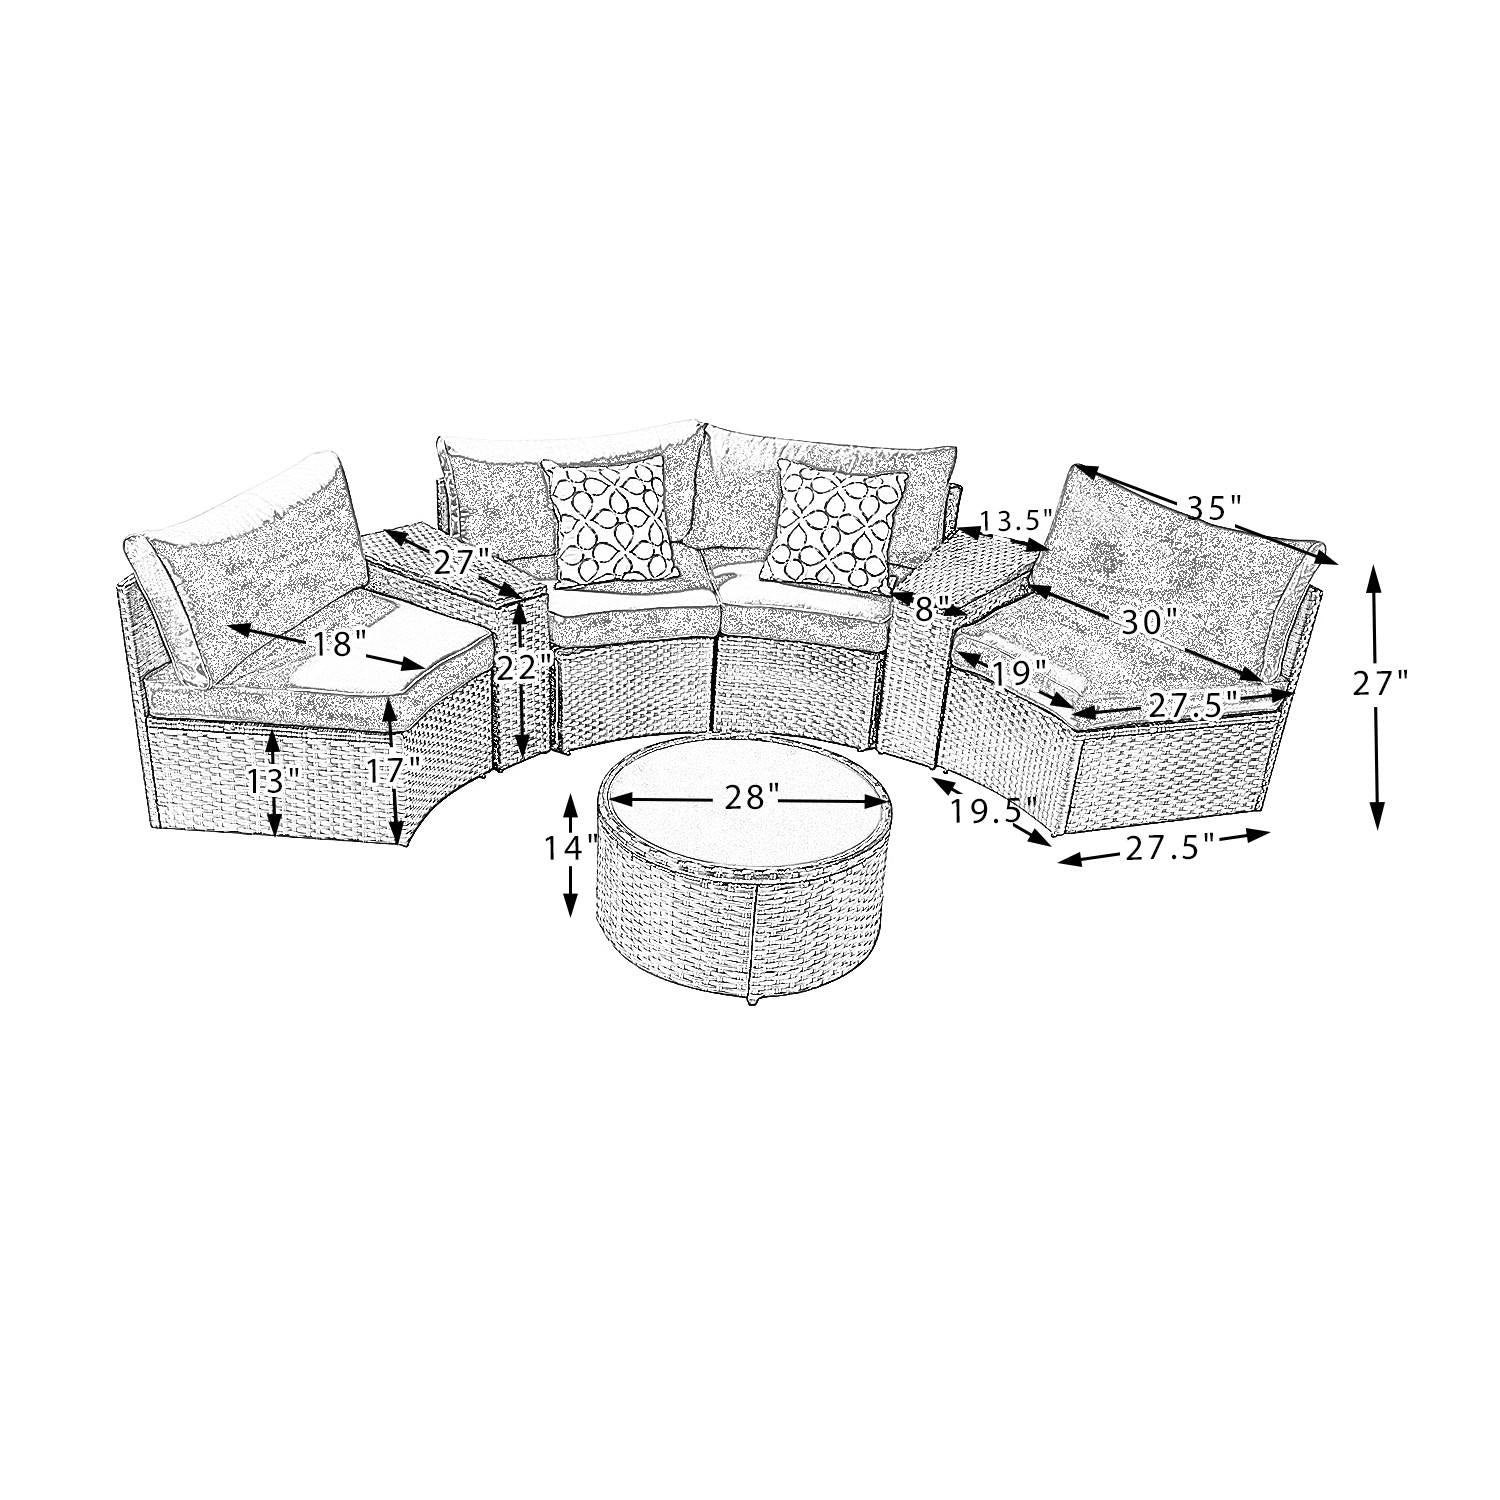 Arched Brown Faux Rattan and Aqua Outdoor Sectional Sofa Set